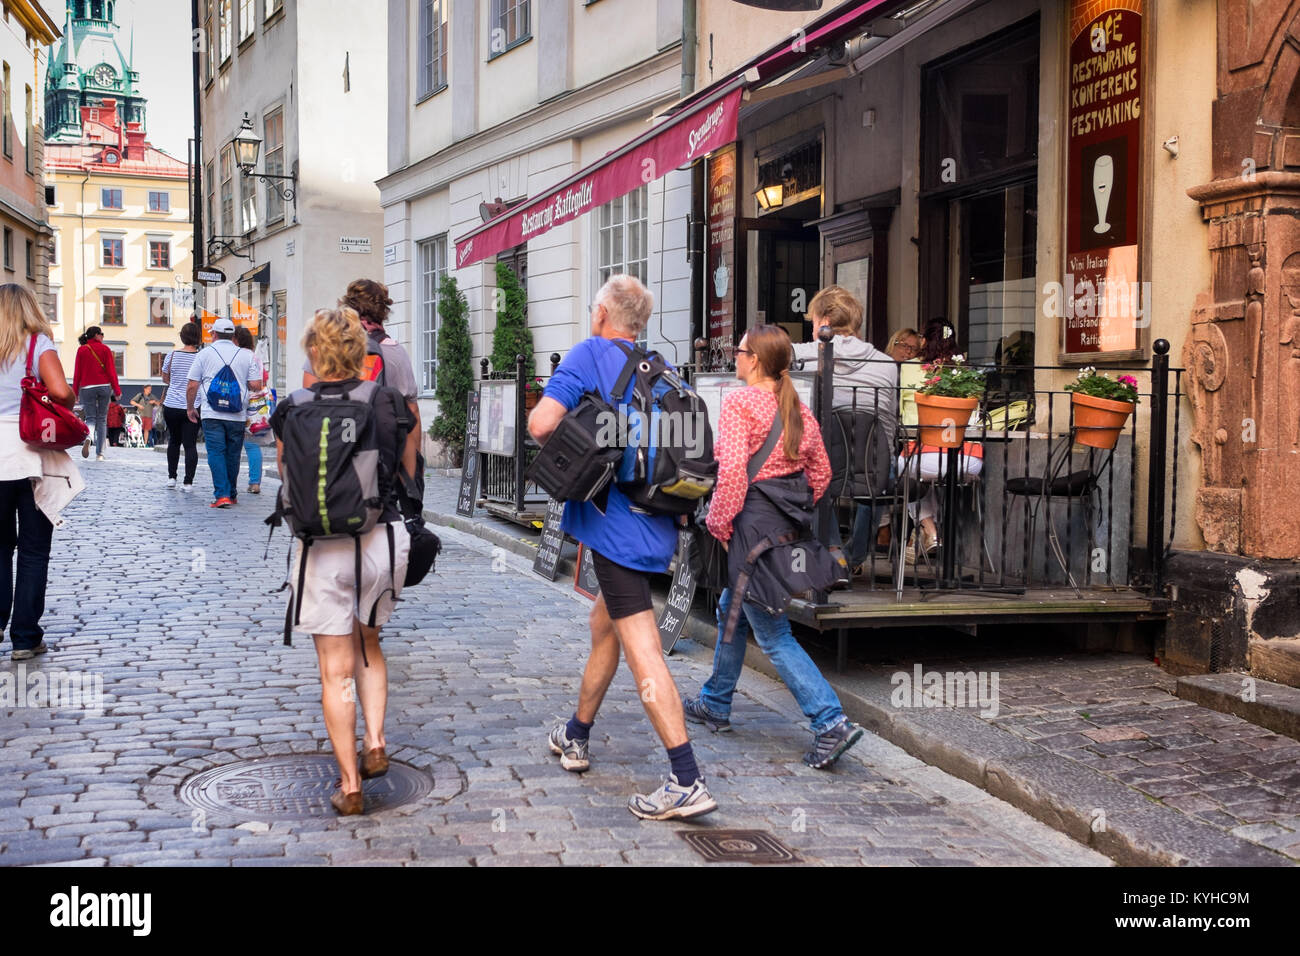 Stockholm busy street in historic Gamla Stan, or Old Town, popular with tourists. Crowds walking on cobblestone streets, eating in sidewalk cafes. Stock Photo